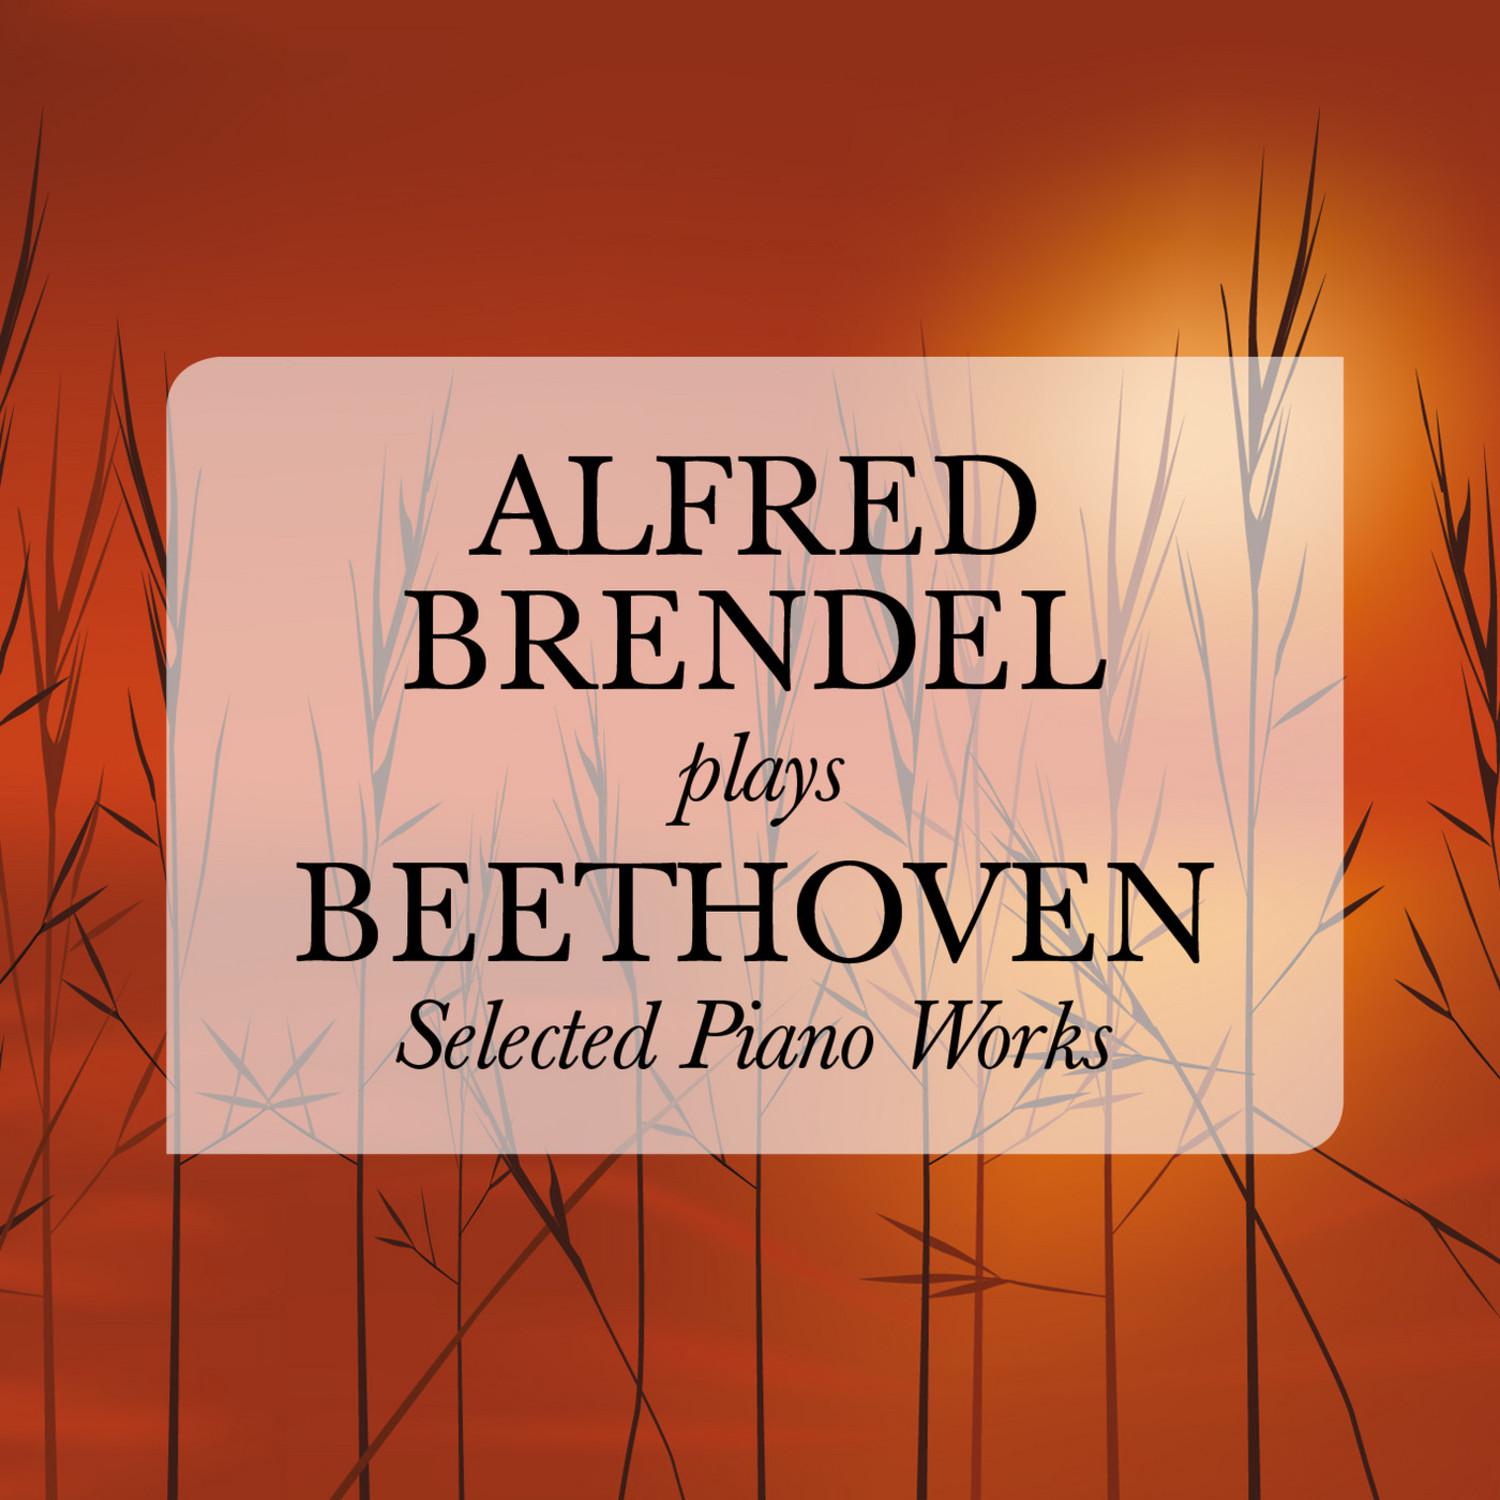 Concerto No. 2 in B-Flat Major for Piano and Orchestra, Op. 19: III. Rondo